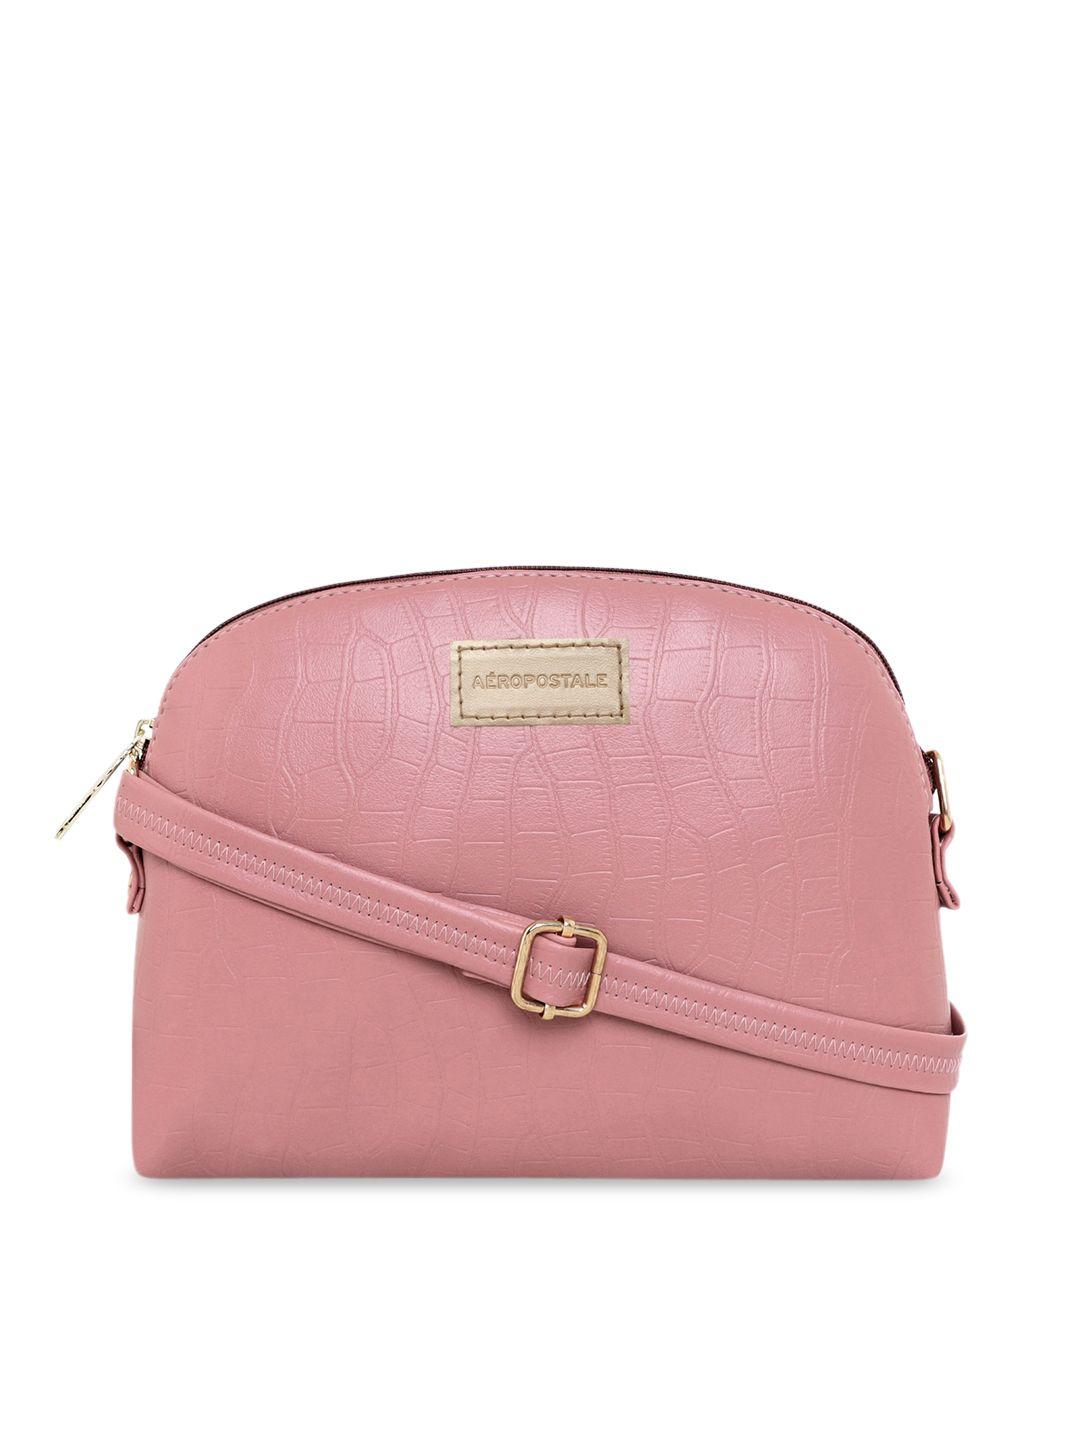 aeropostale pink textured pu structured sling bag with quilted